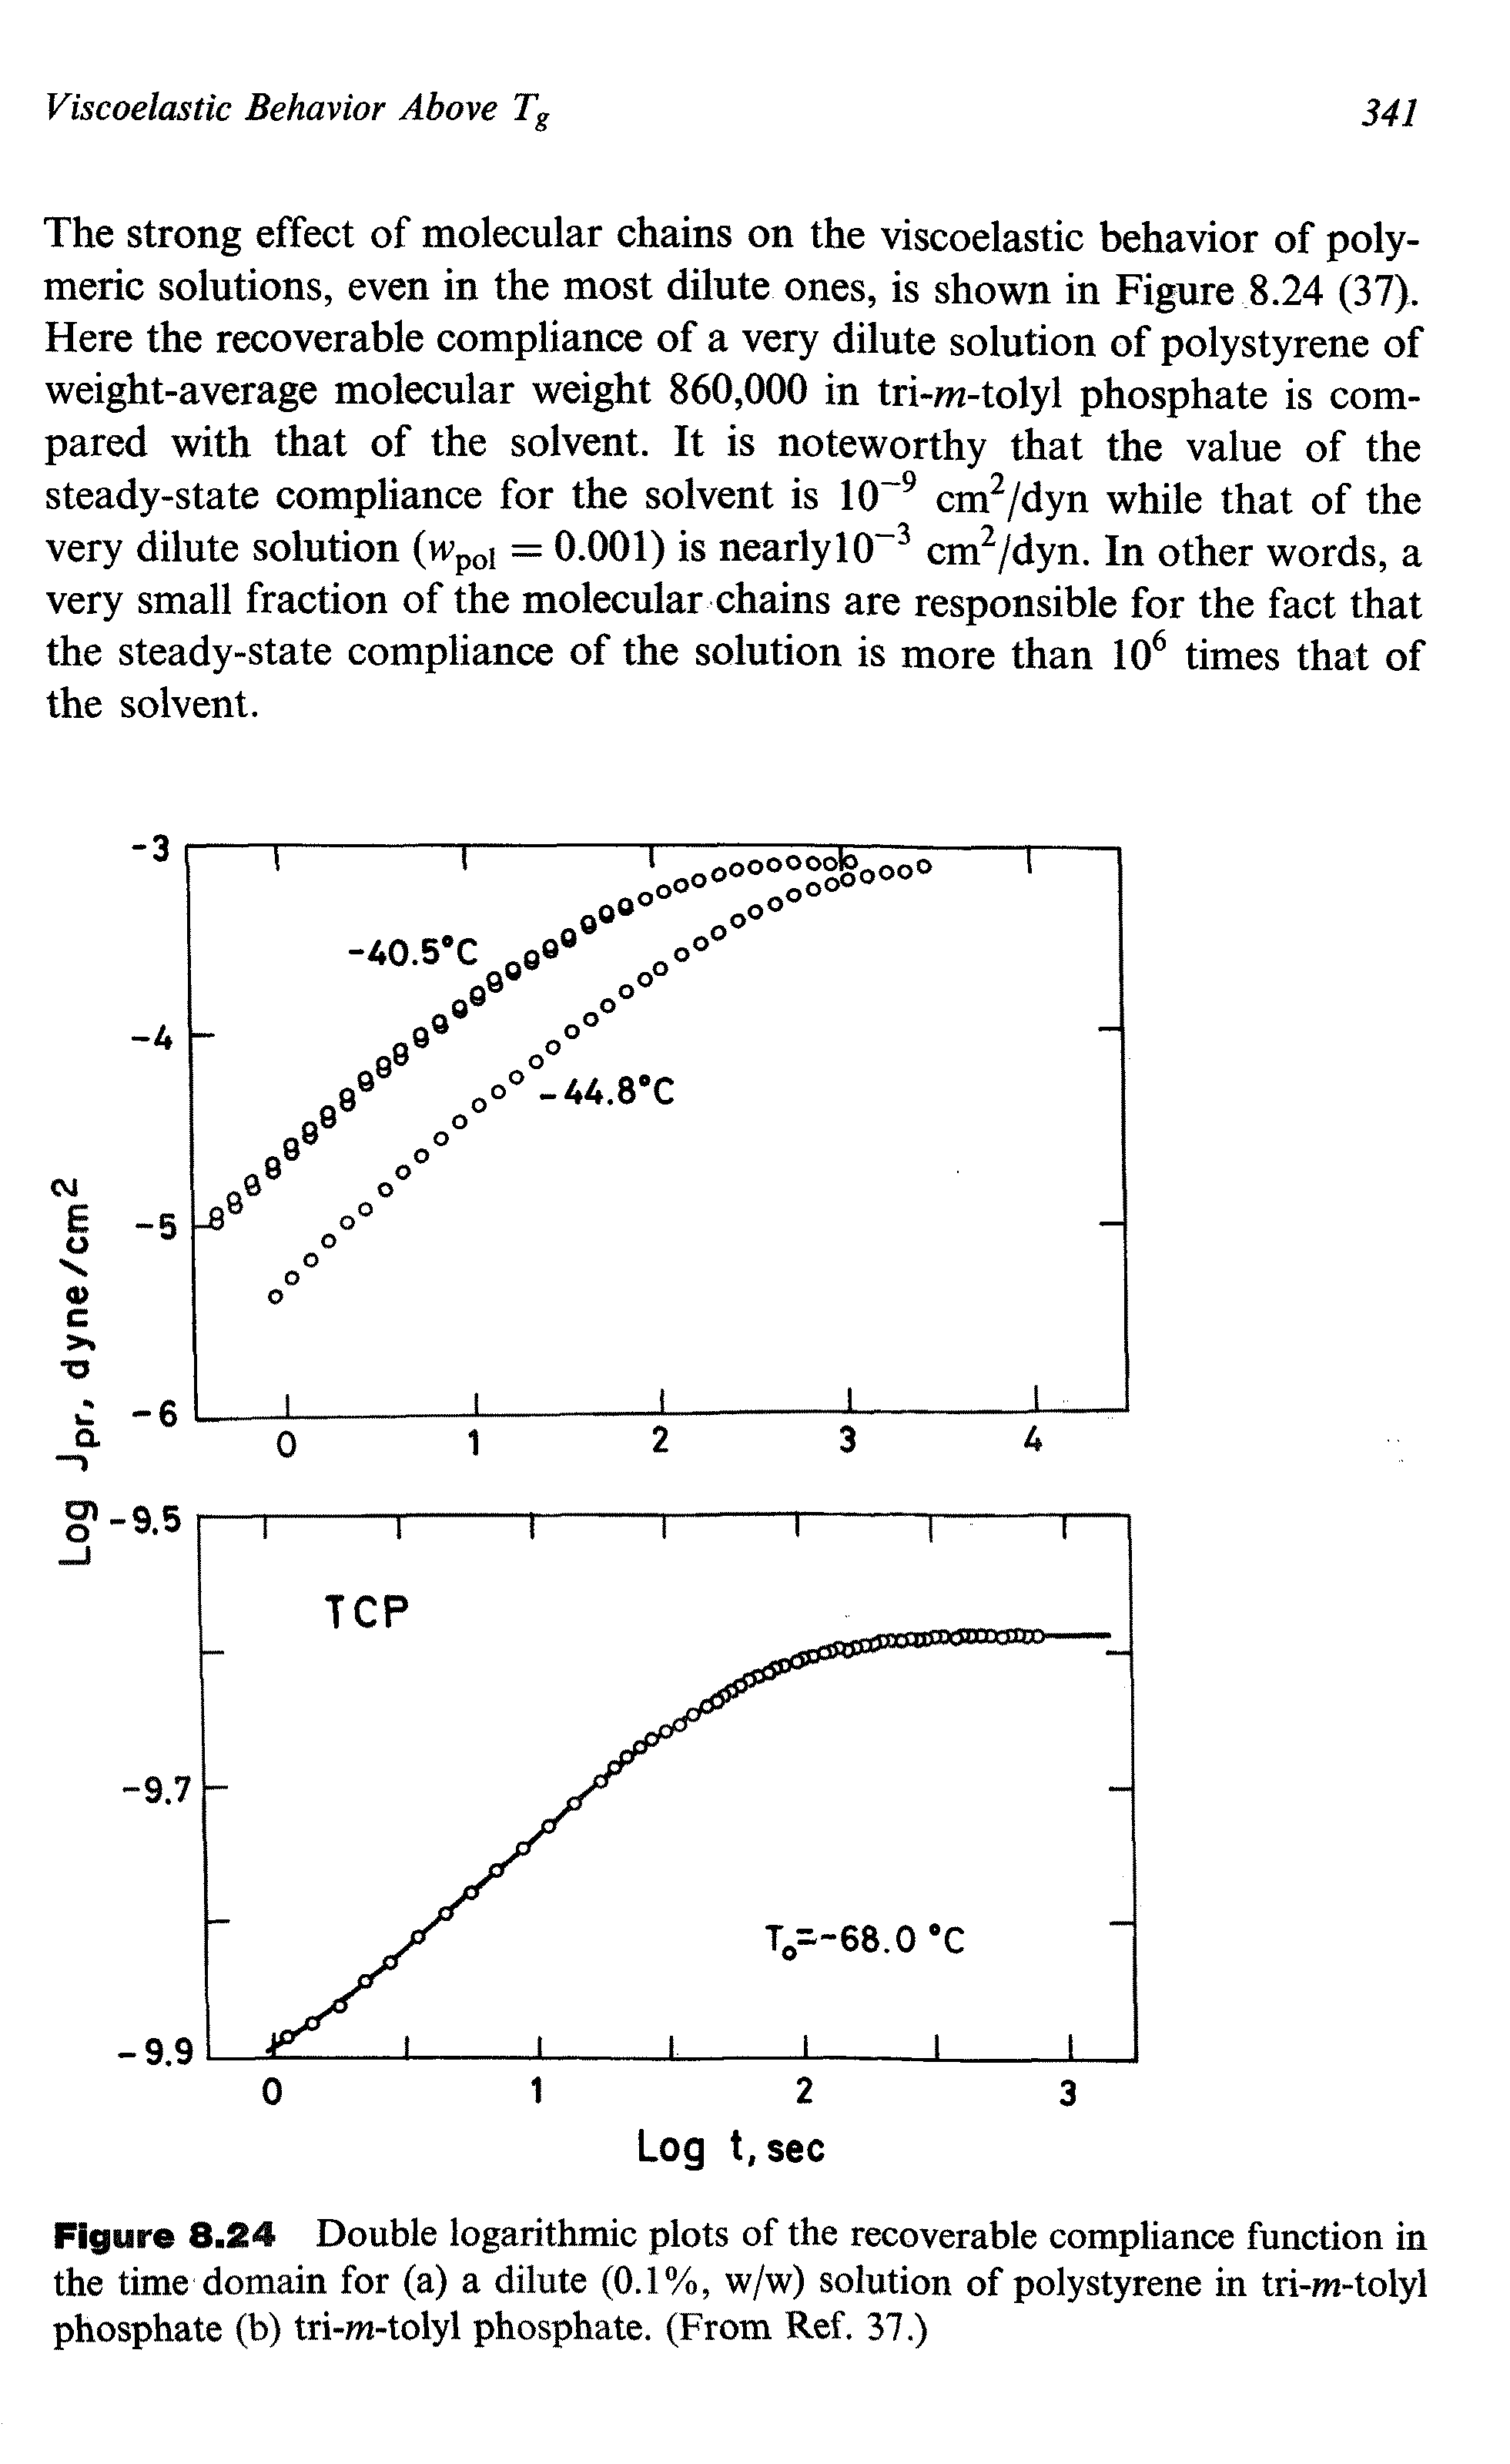 Figure 8.24 Double logarithmic plots of the recoverable compliance function in the time domain for (a) a dilute (0.1%, w/w) solution of polystyrene in tri-m-tolyl phosphate (b) tri-m-tolyl phosphate. (From Ref. 37.)...